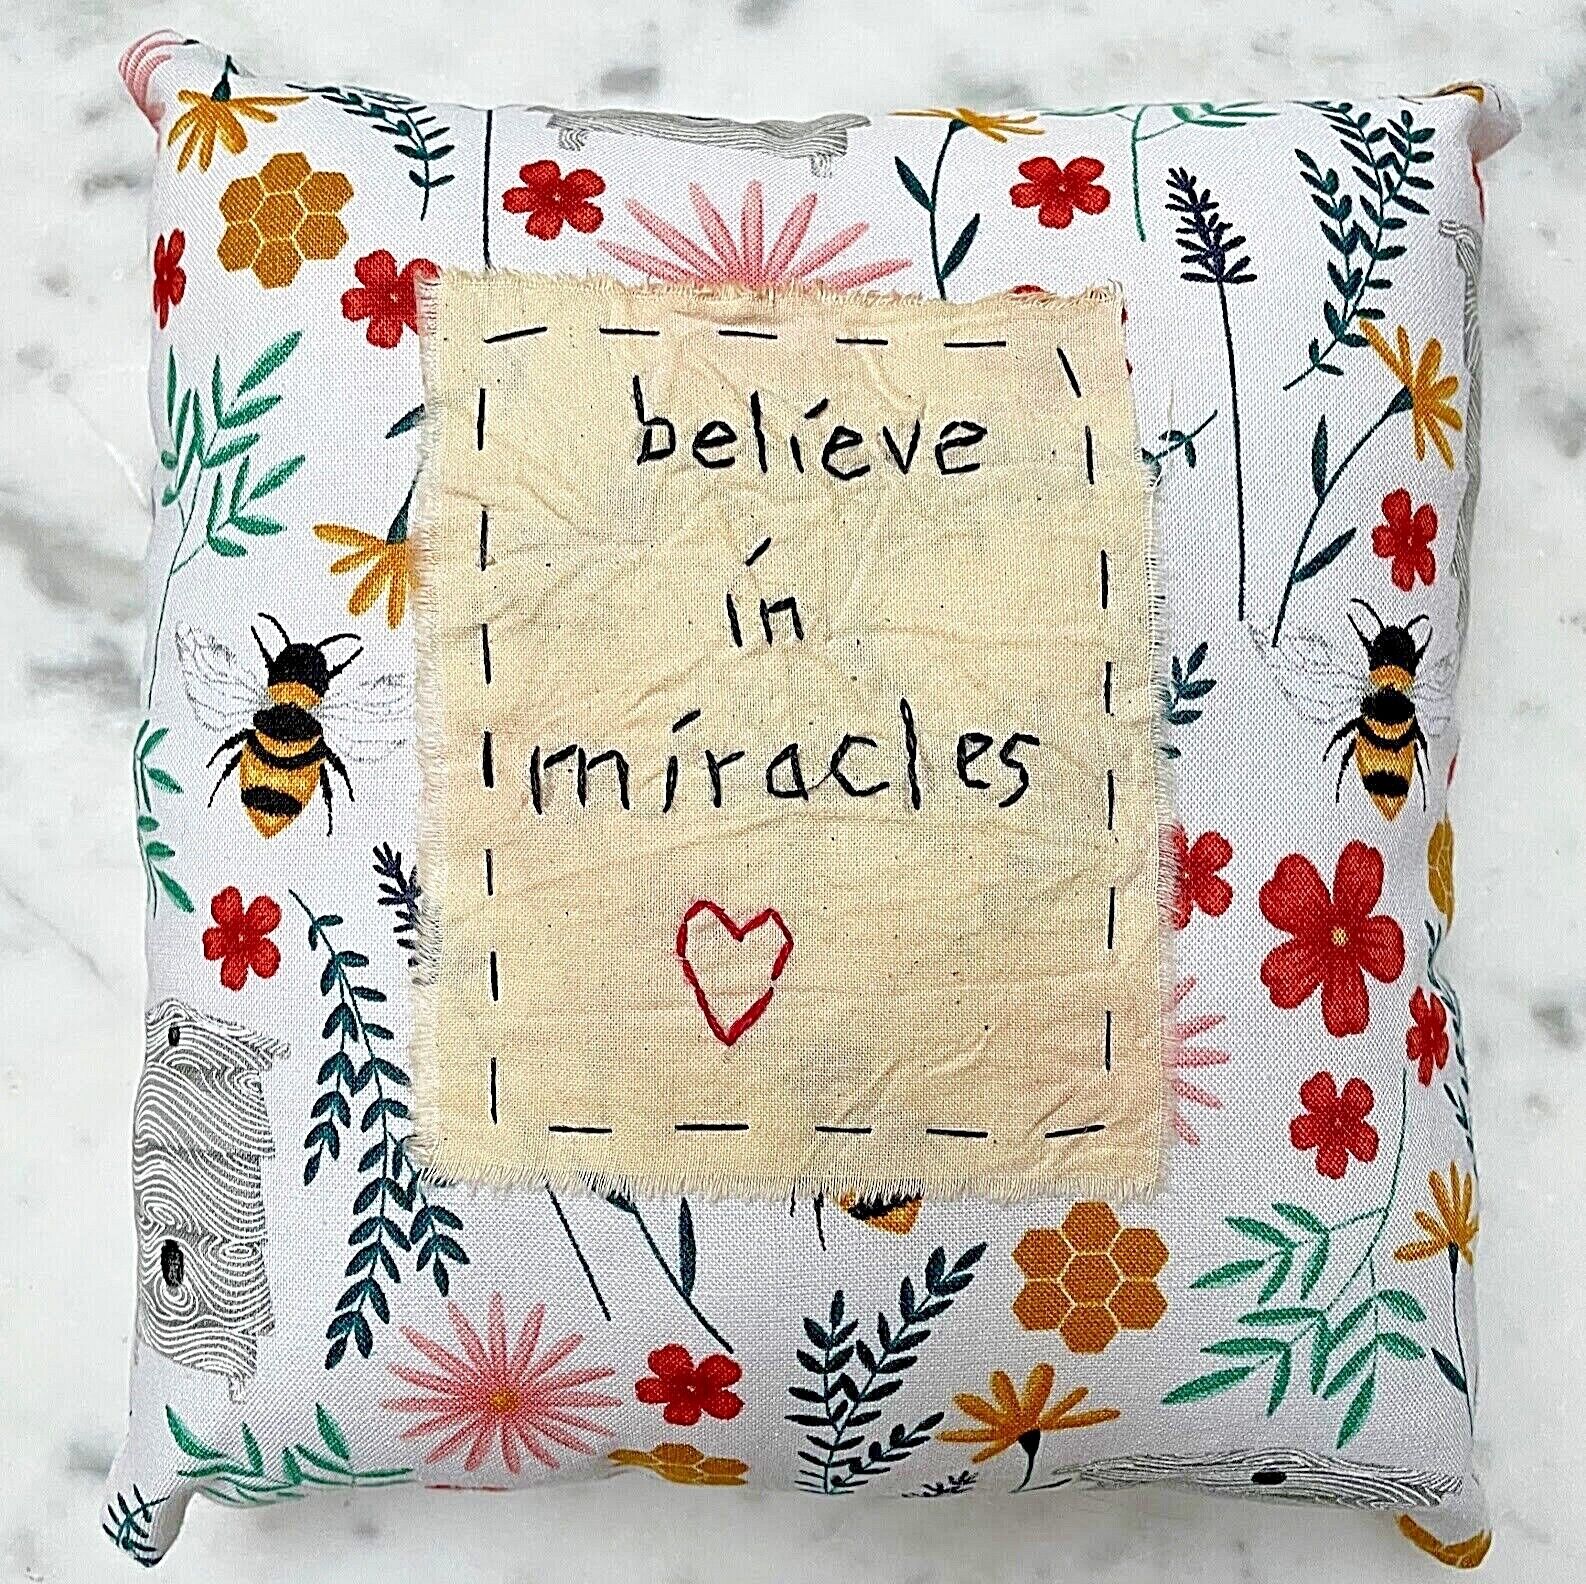 Primitive Handmade Believe in Miracles Accent Pillow Floral Fabric 7&quot; X 7&quot; - The Primitive Pineapple Collection